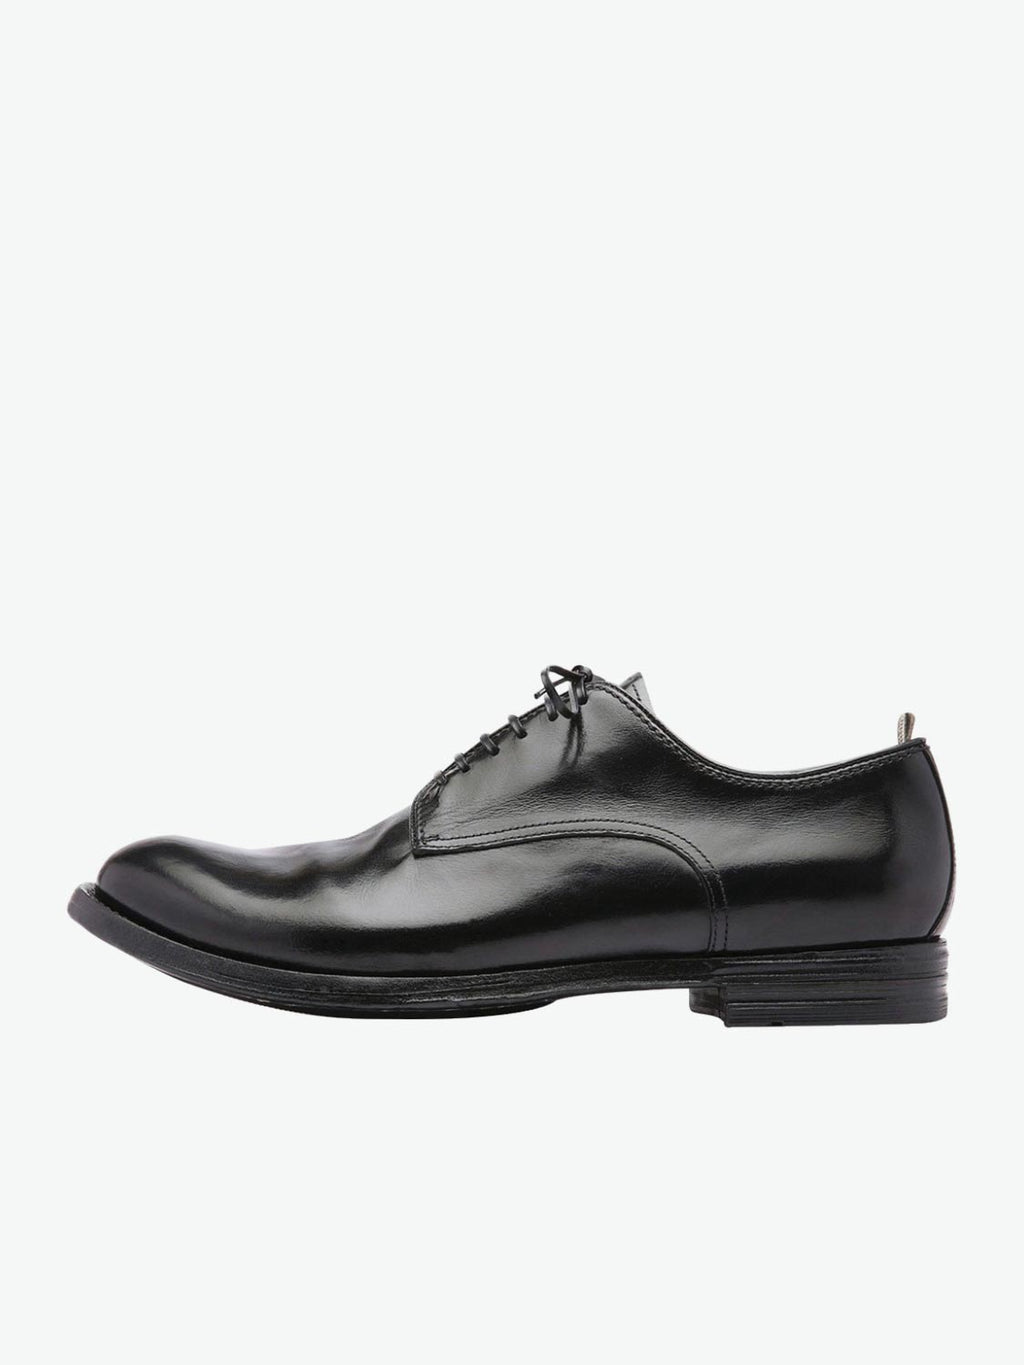 Officine Creative Anatomia Derby Leather Shoes Black | The Project Garments - A